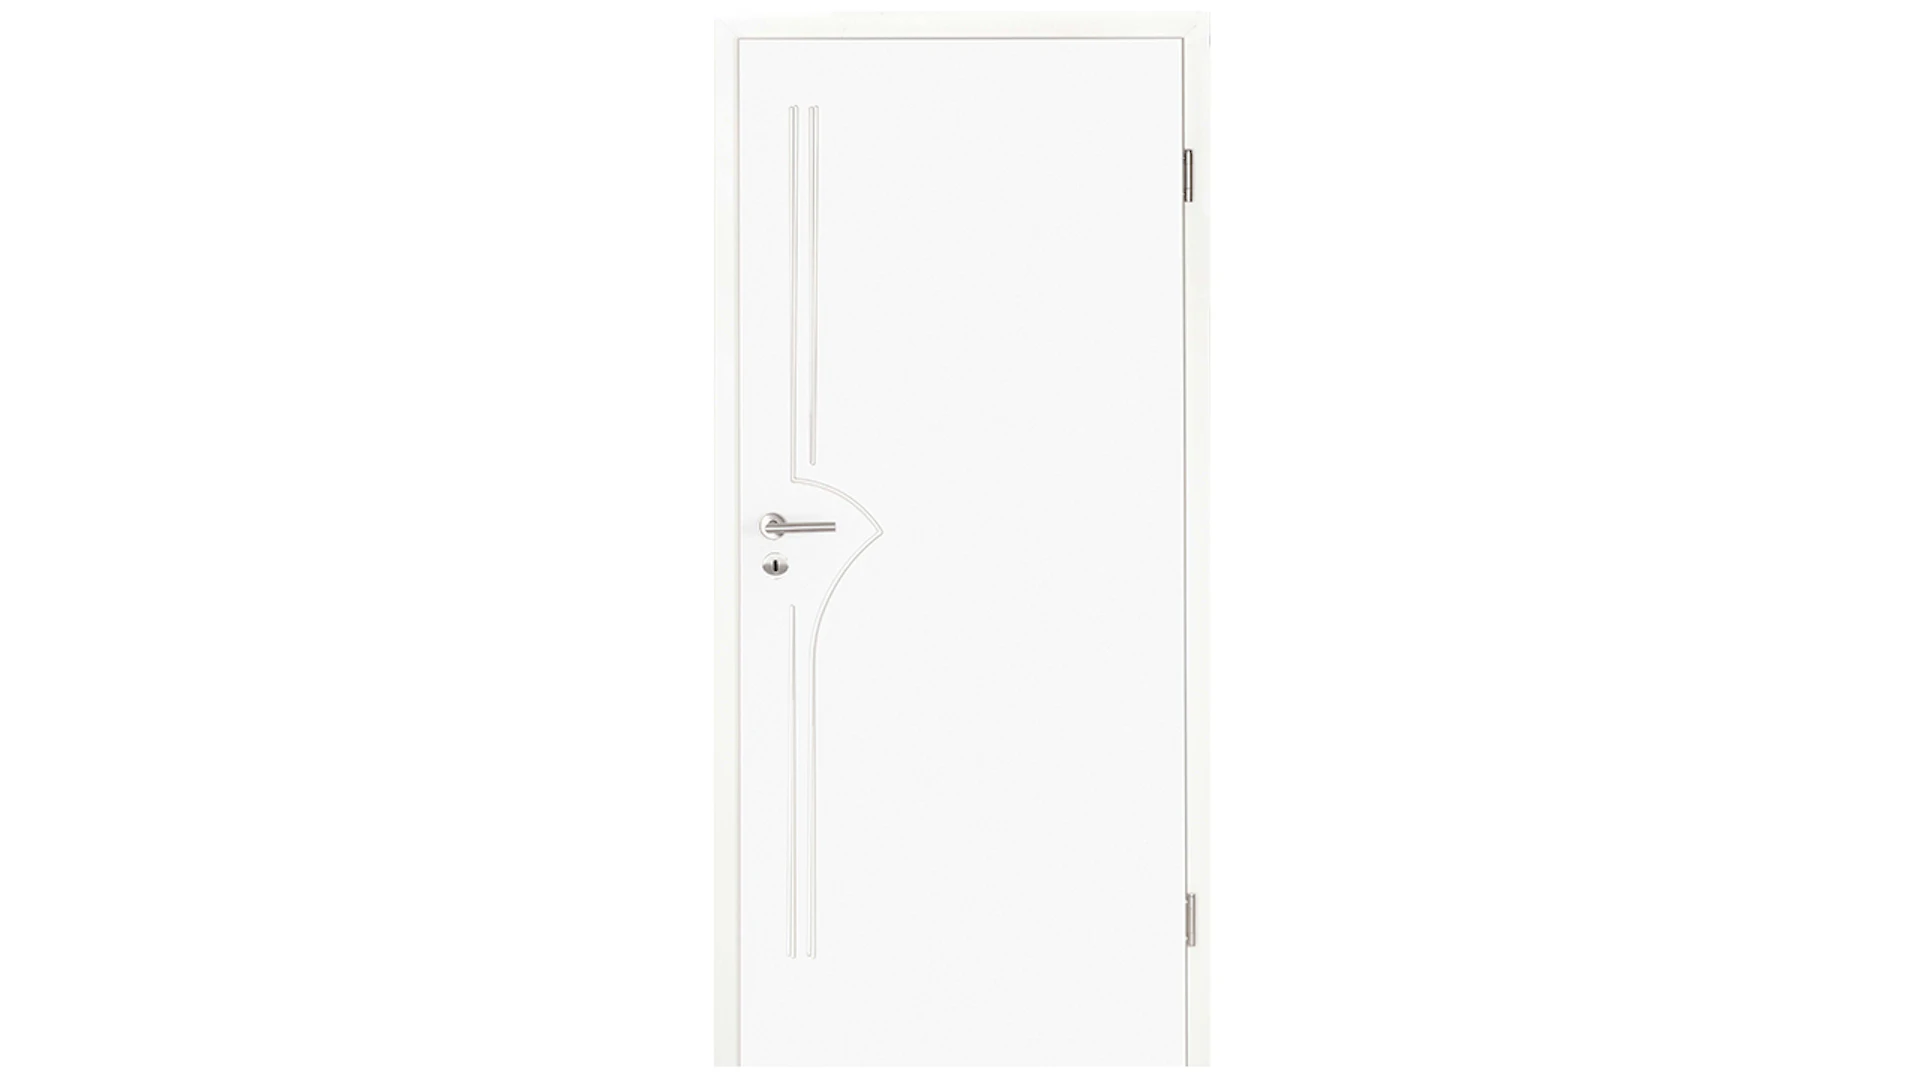 planeo interior door lacquer 2.0 - Kalle 9010 white lacquer 1985 x 985 mm DIN R - round RSP hinge 3-t